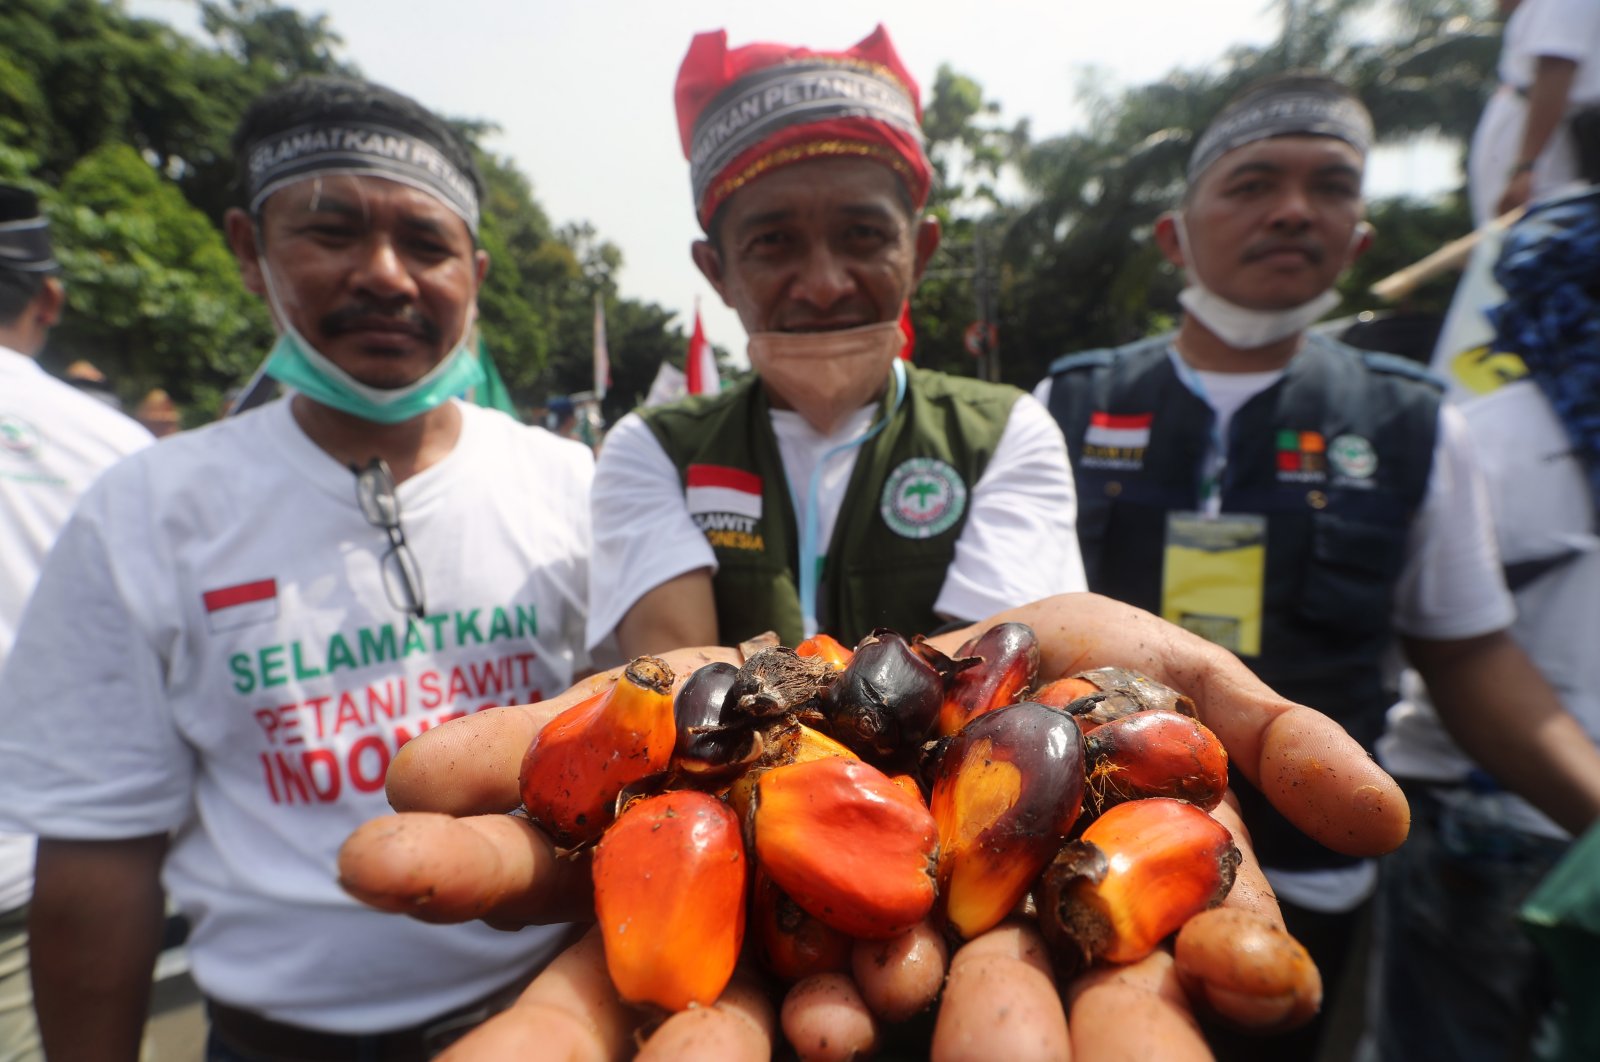 An Indonesian activist holds palm fruits during a protest in Jakarta, Indonesia, May 17, 2022. Hundreds of Indonesian palm farmers staged protests to urge the Indonesian goverment to grant permision for the export of crude palm oil (CPO) to aid farmers. (EPA Photo)